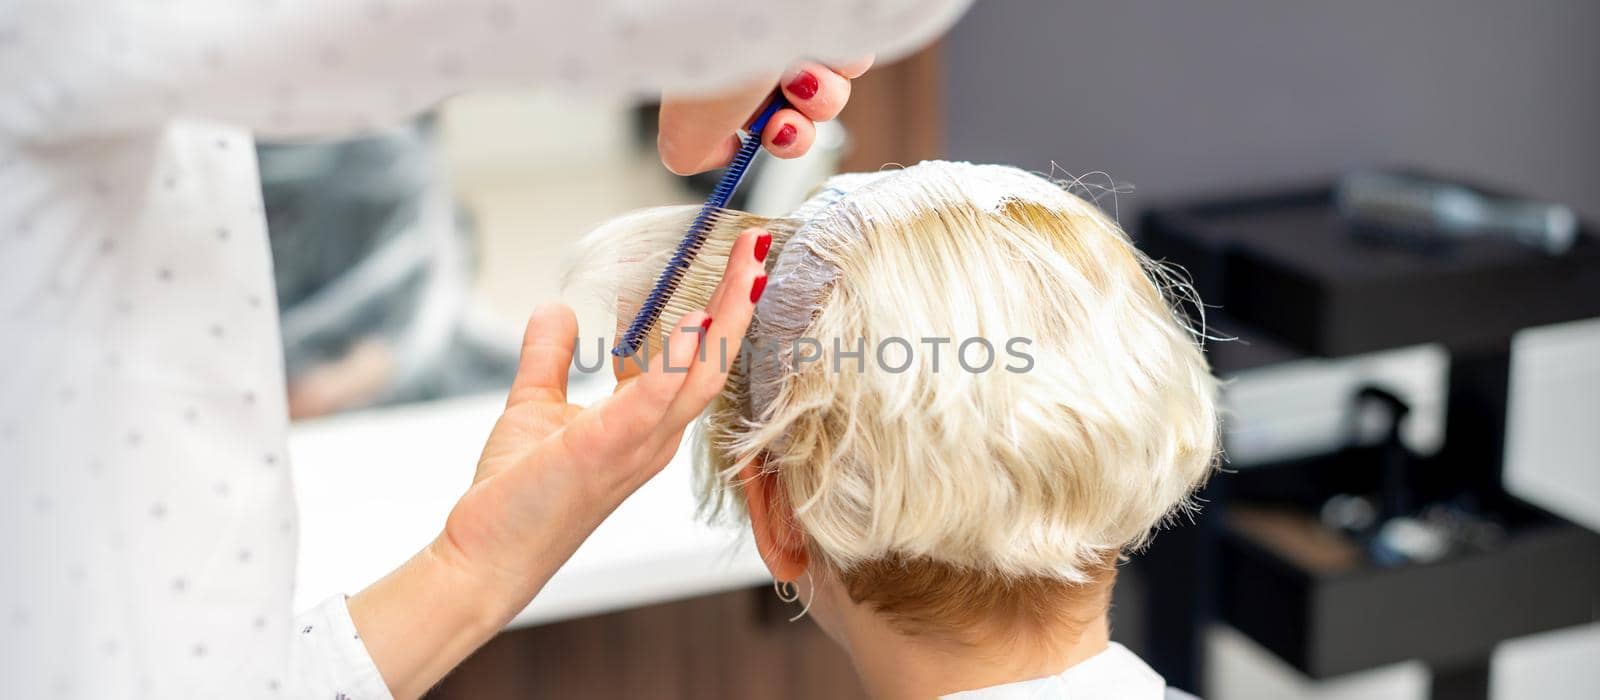 Female hairdresser styling short white hair of the young blonde woman with hands and comb in a hair salon. by okskukuruza